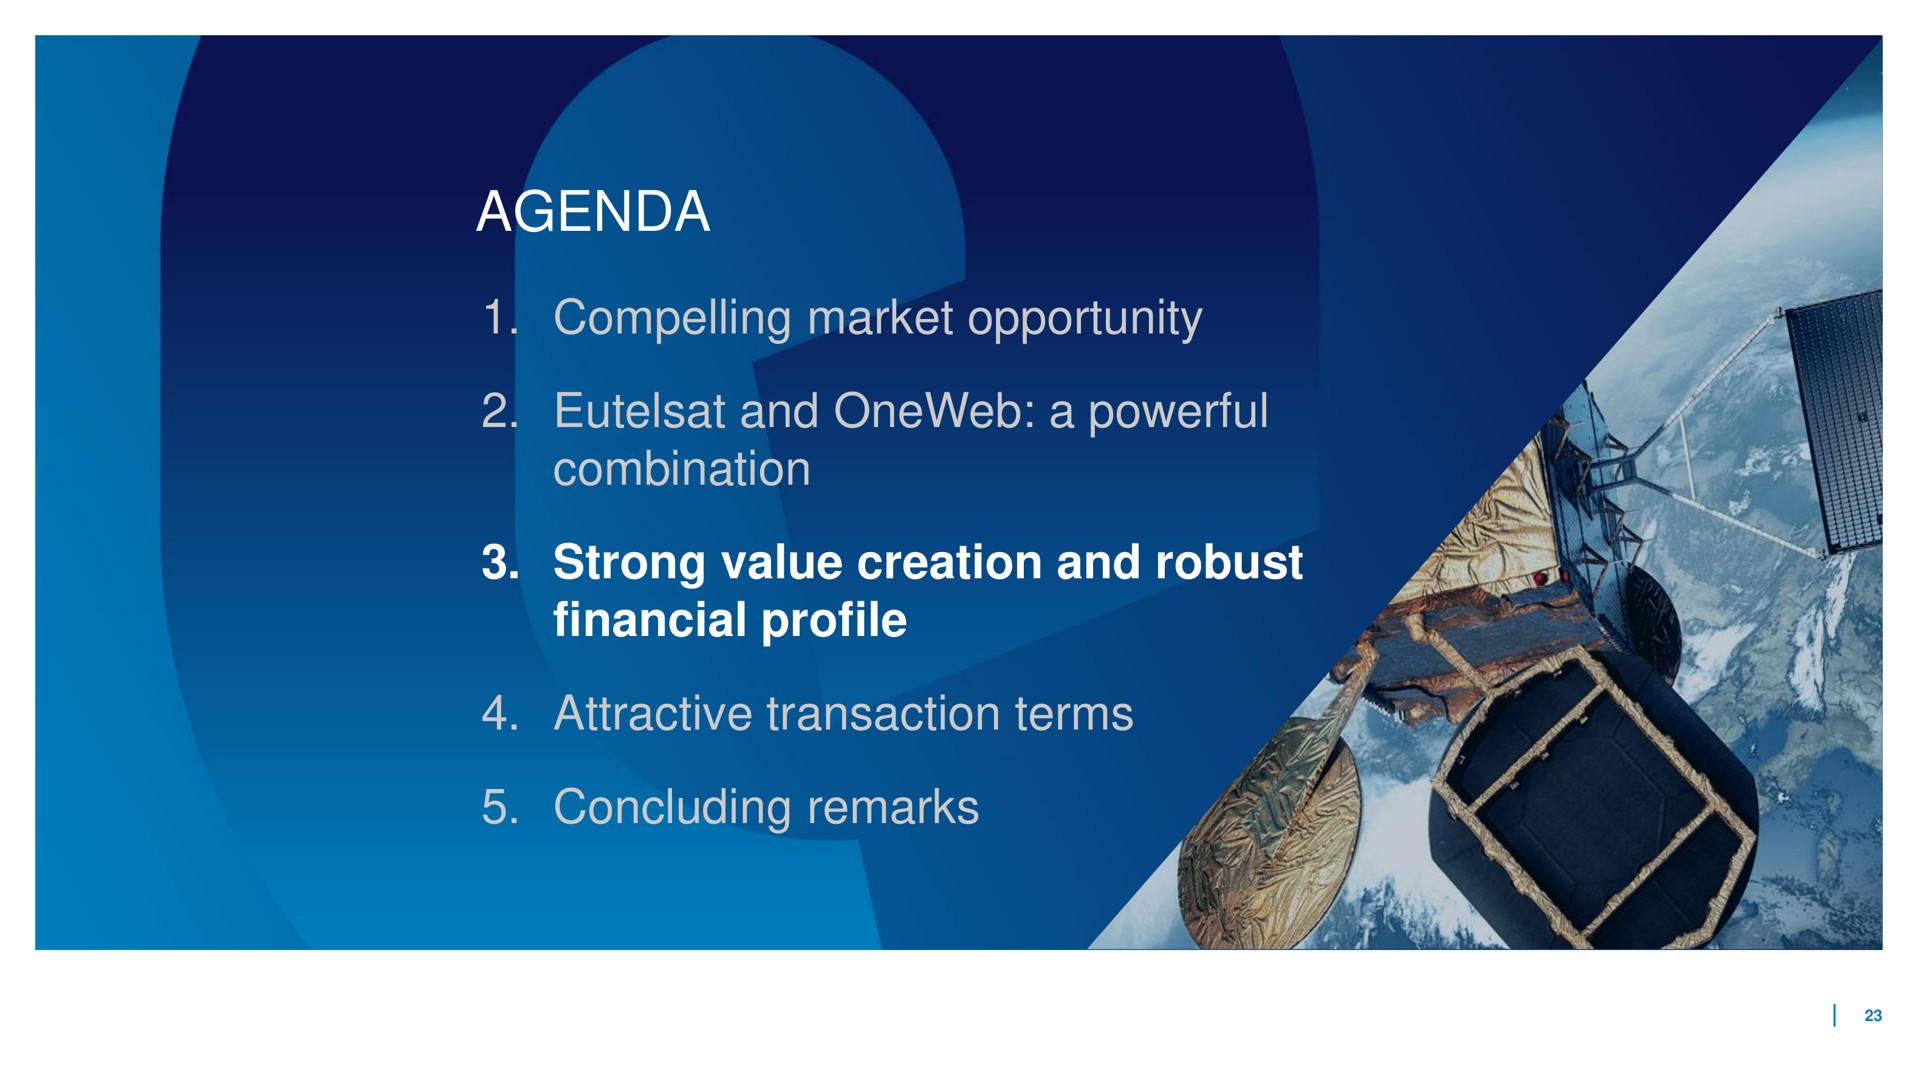 agenda compelling market opportunity and a powerful combination strong value creation and robust financial profile attractive transaction terms concluding remarks | Eutelsat